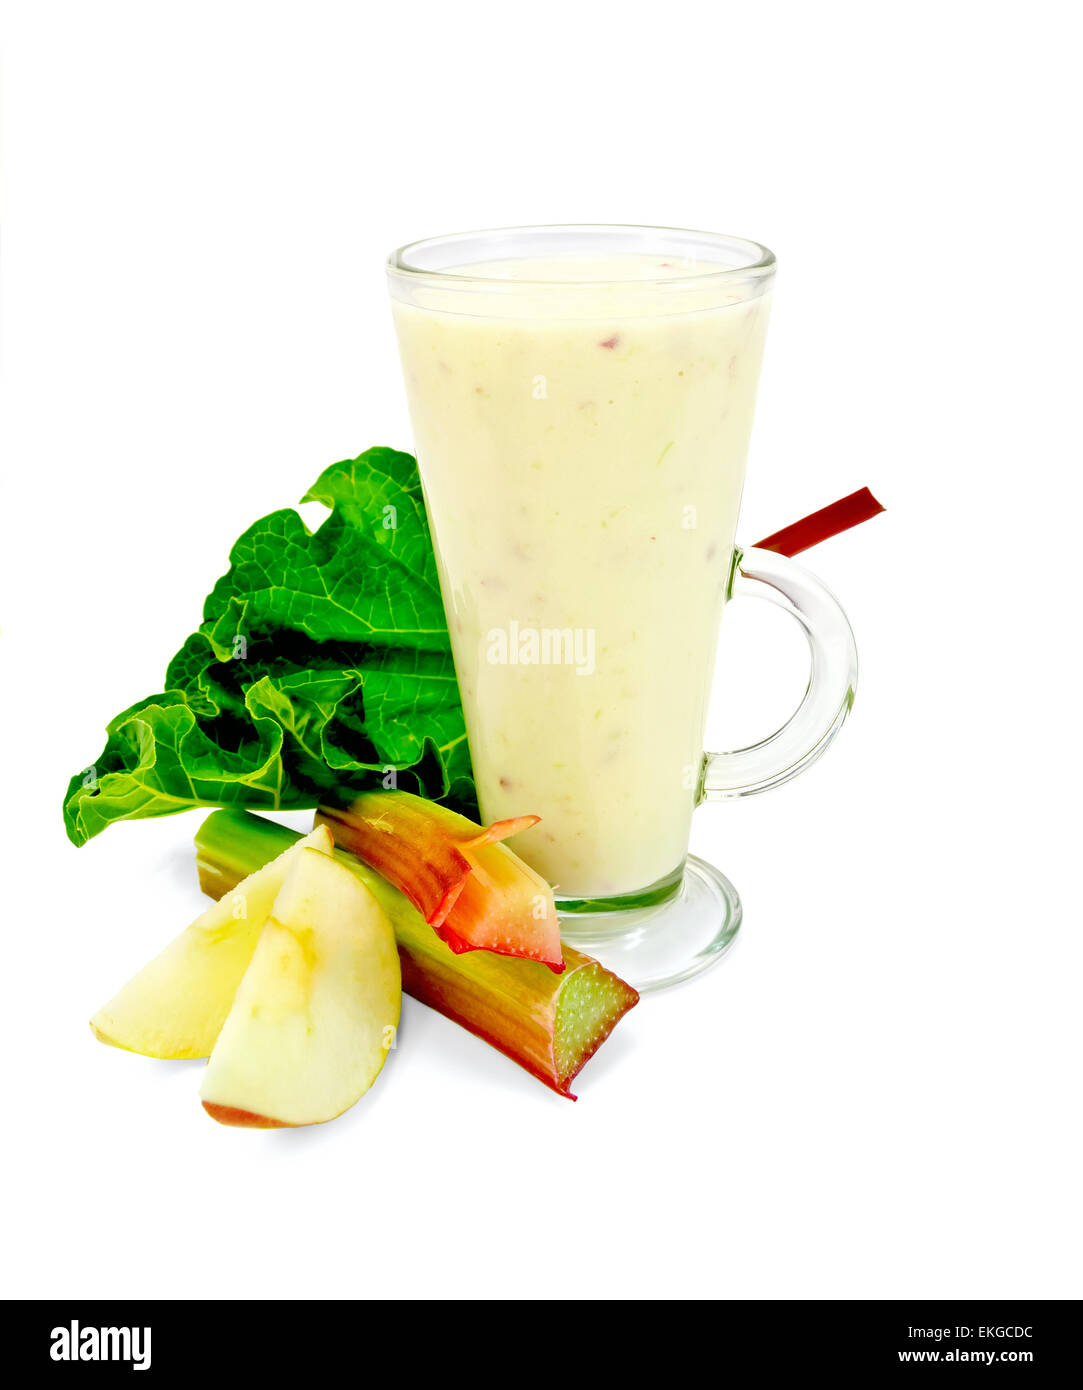 Milkshake with rhubarb and apples in tall glass Stock Photo